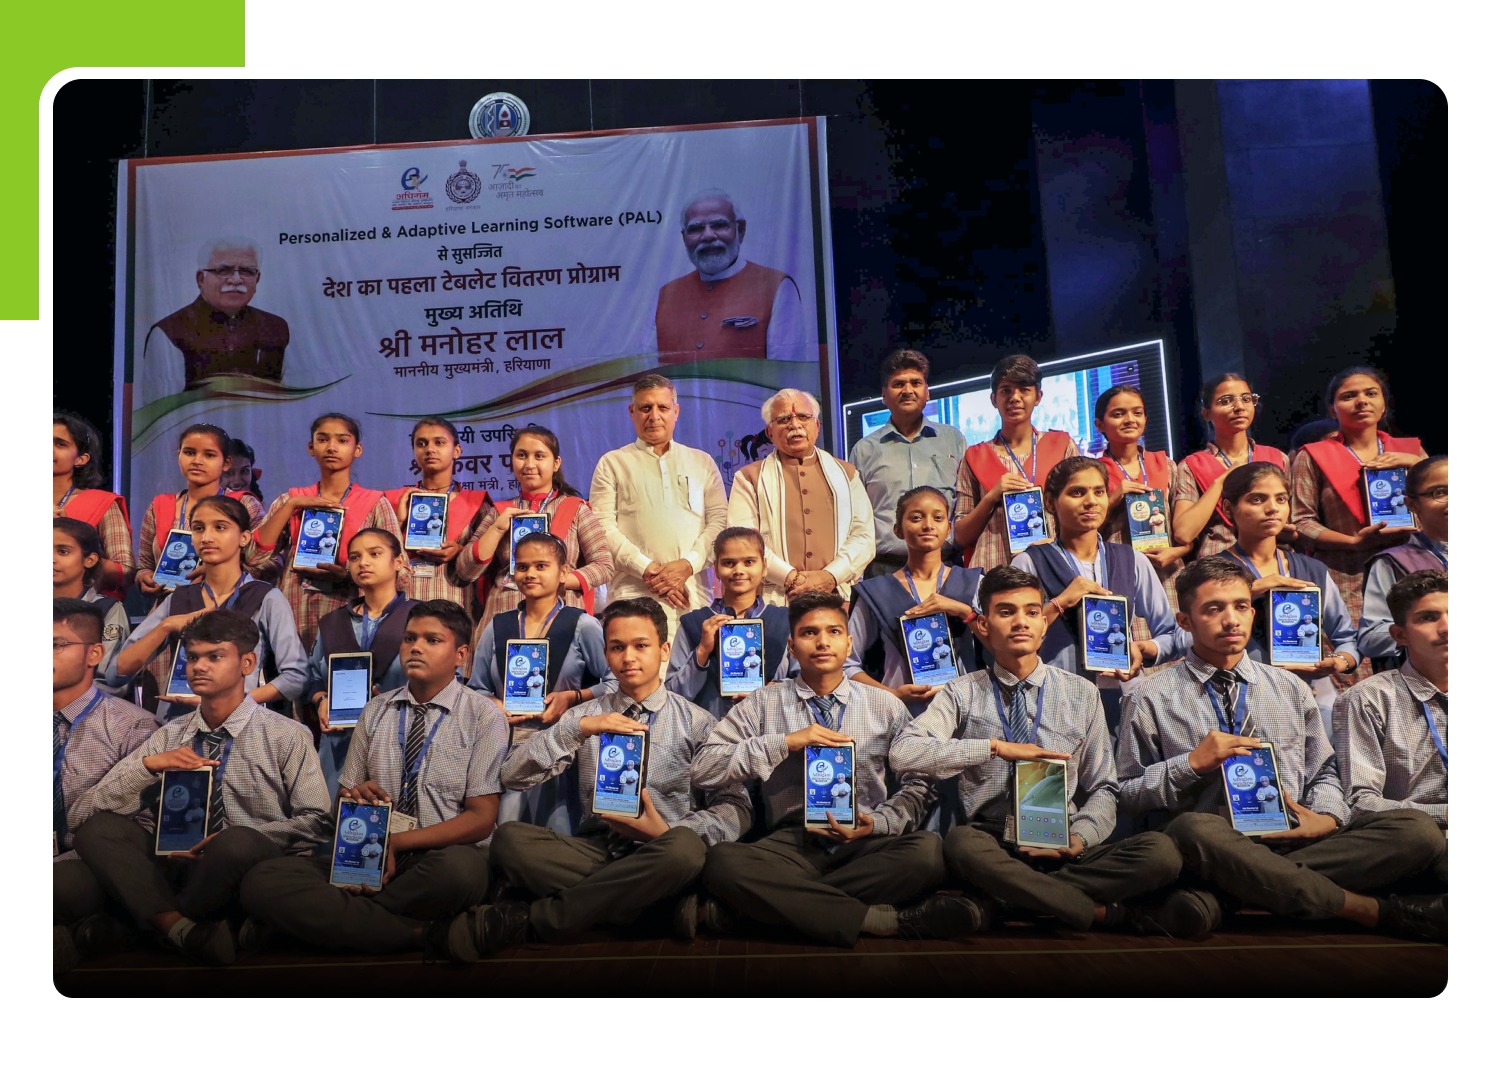 Haryana Government awards work to a Haryana Startup, iDream Education for implementation of PAL on Tablets under e-Adhigam